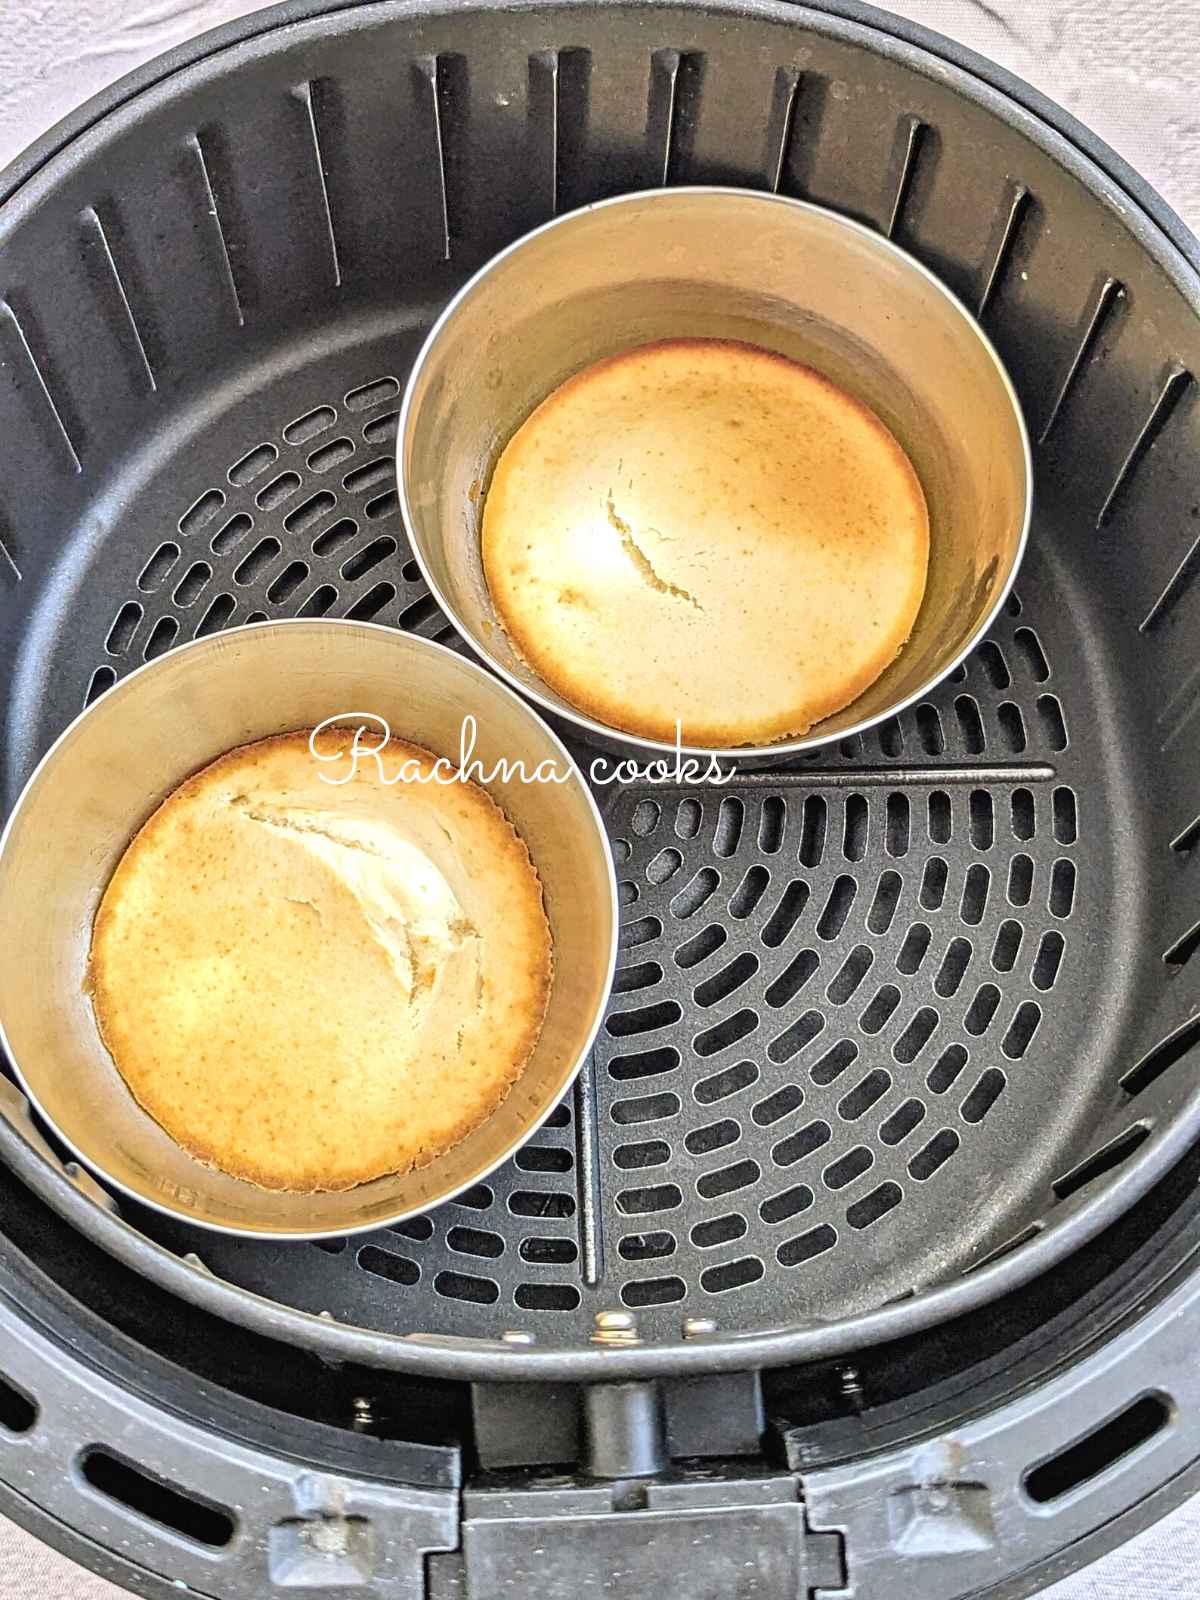 Two pancakes cooked in metal moulds placed in air fryer basket.